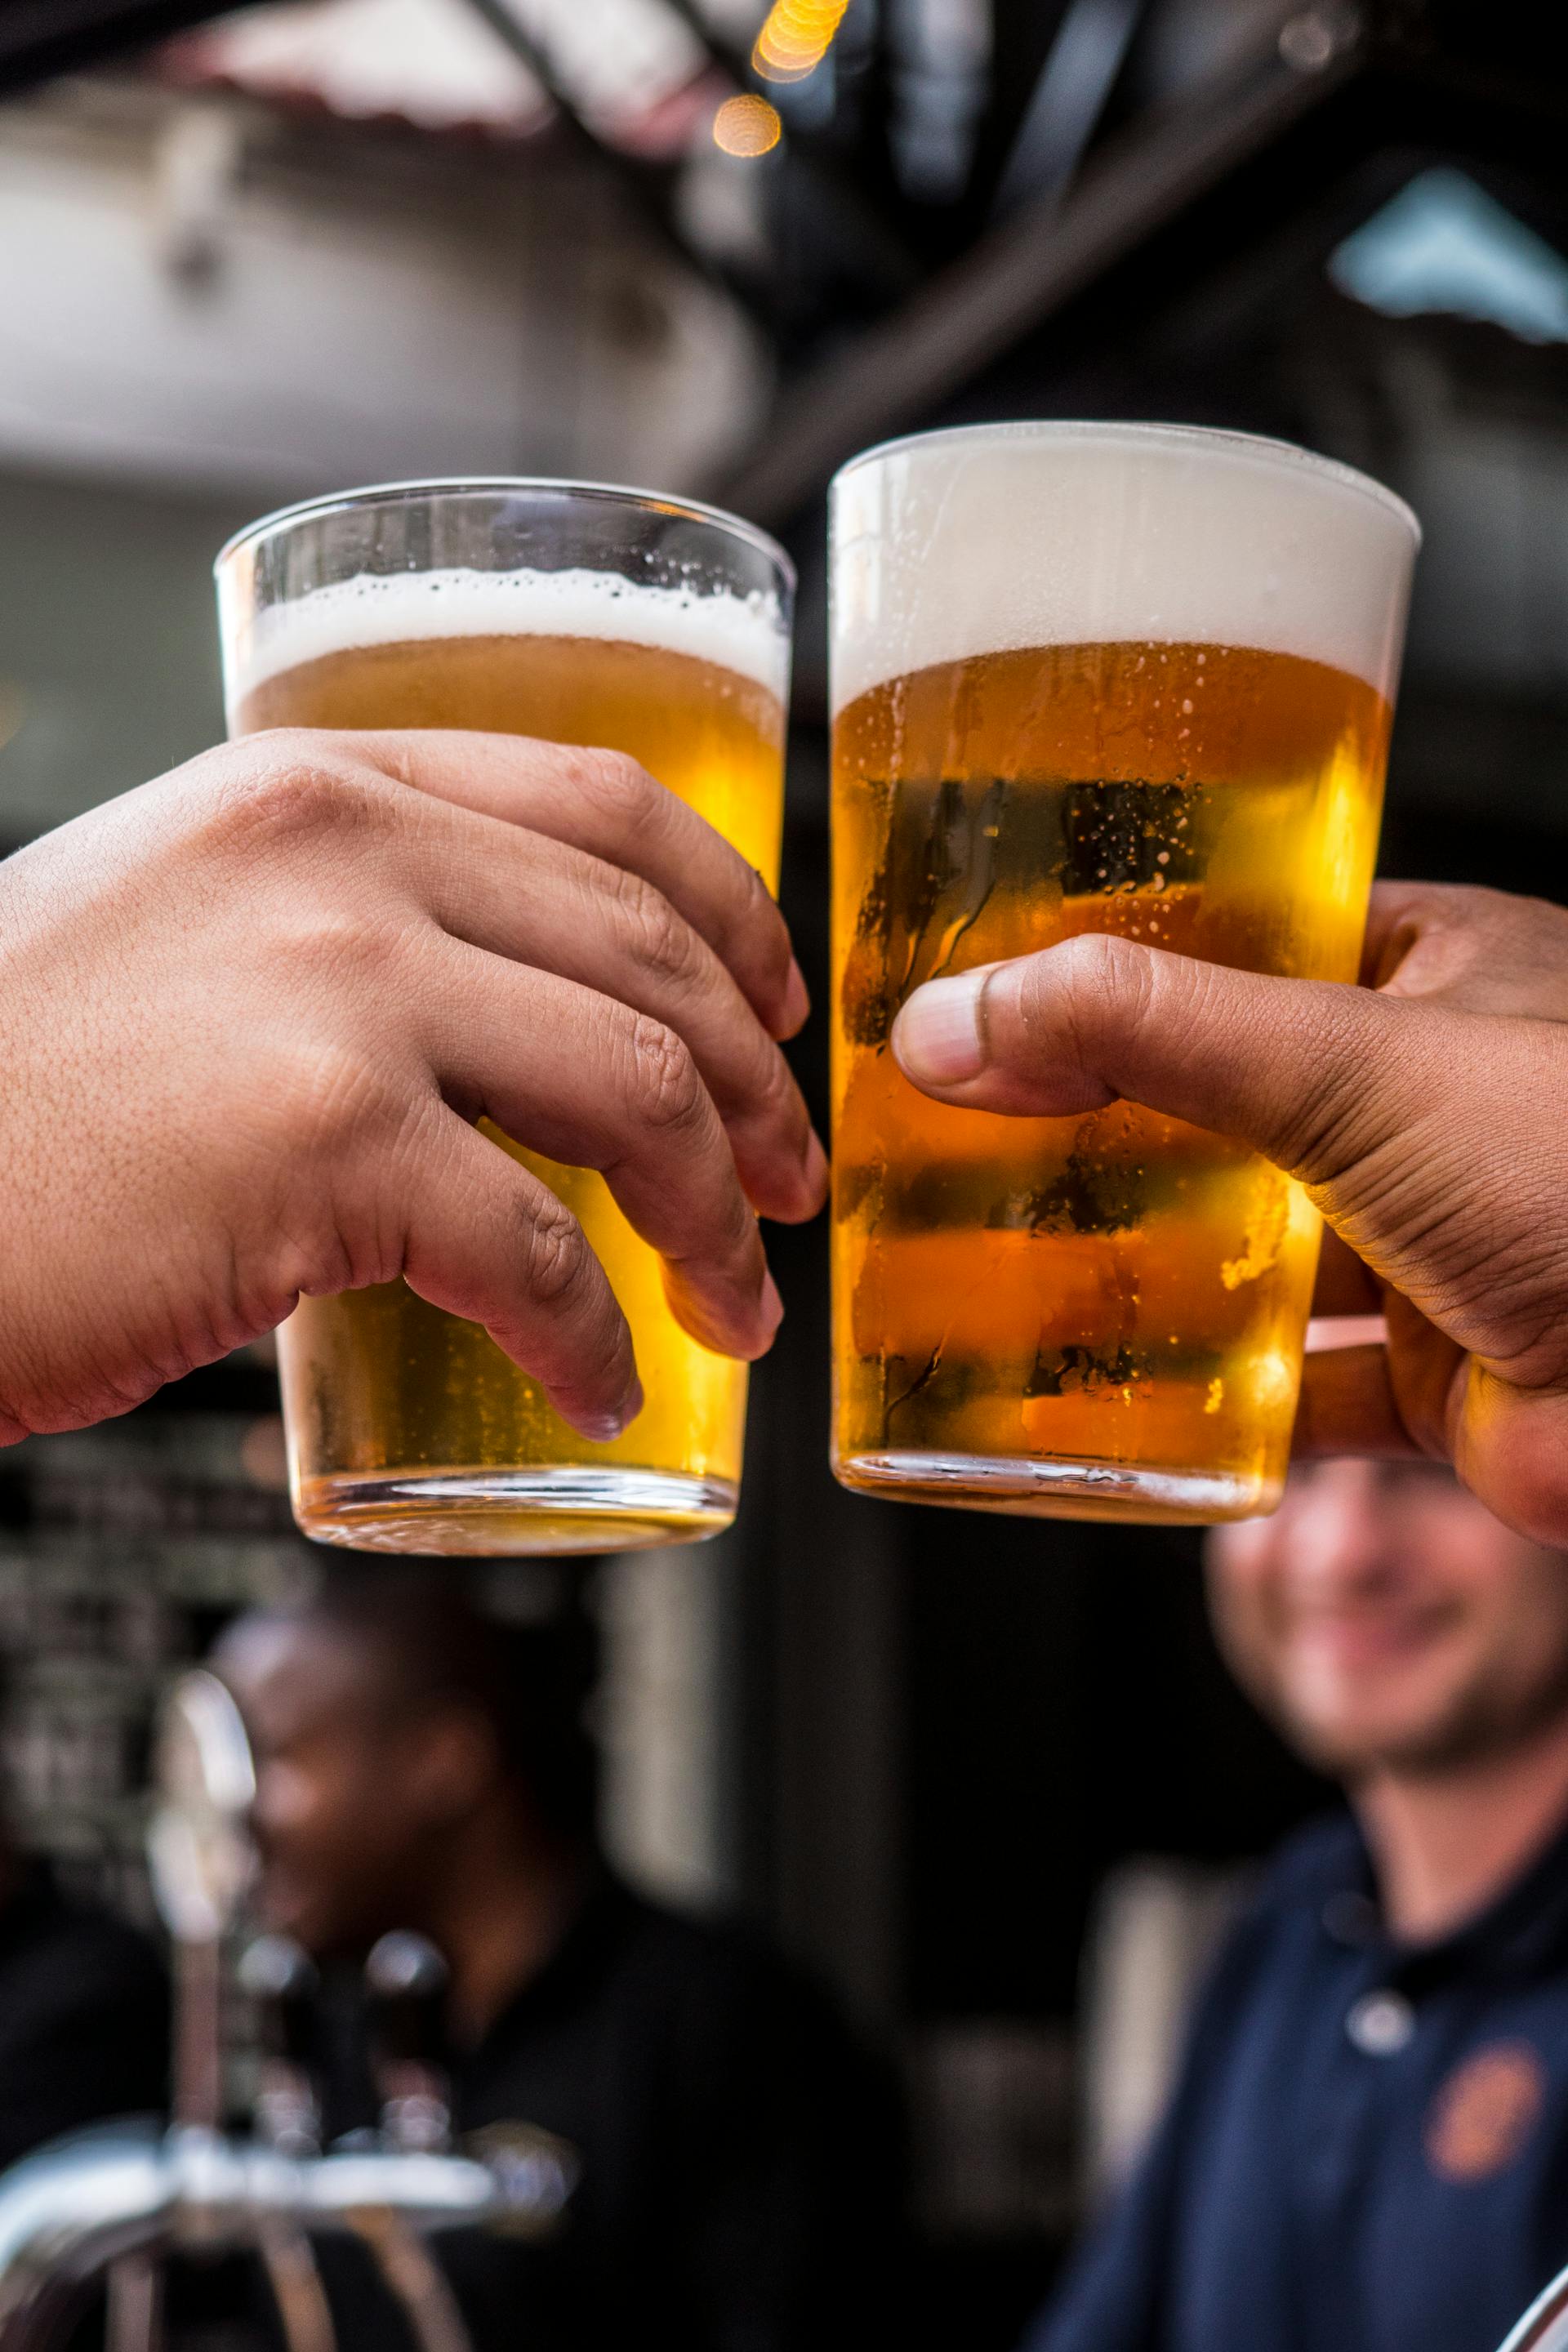 Two persons holding glasses filled with beer | Source: Pexels